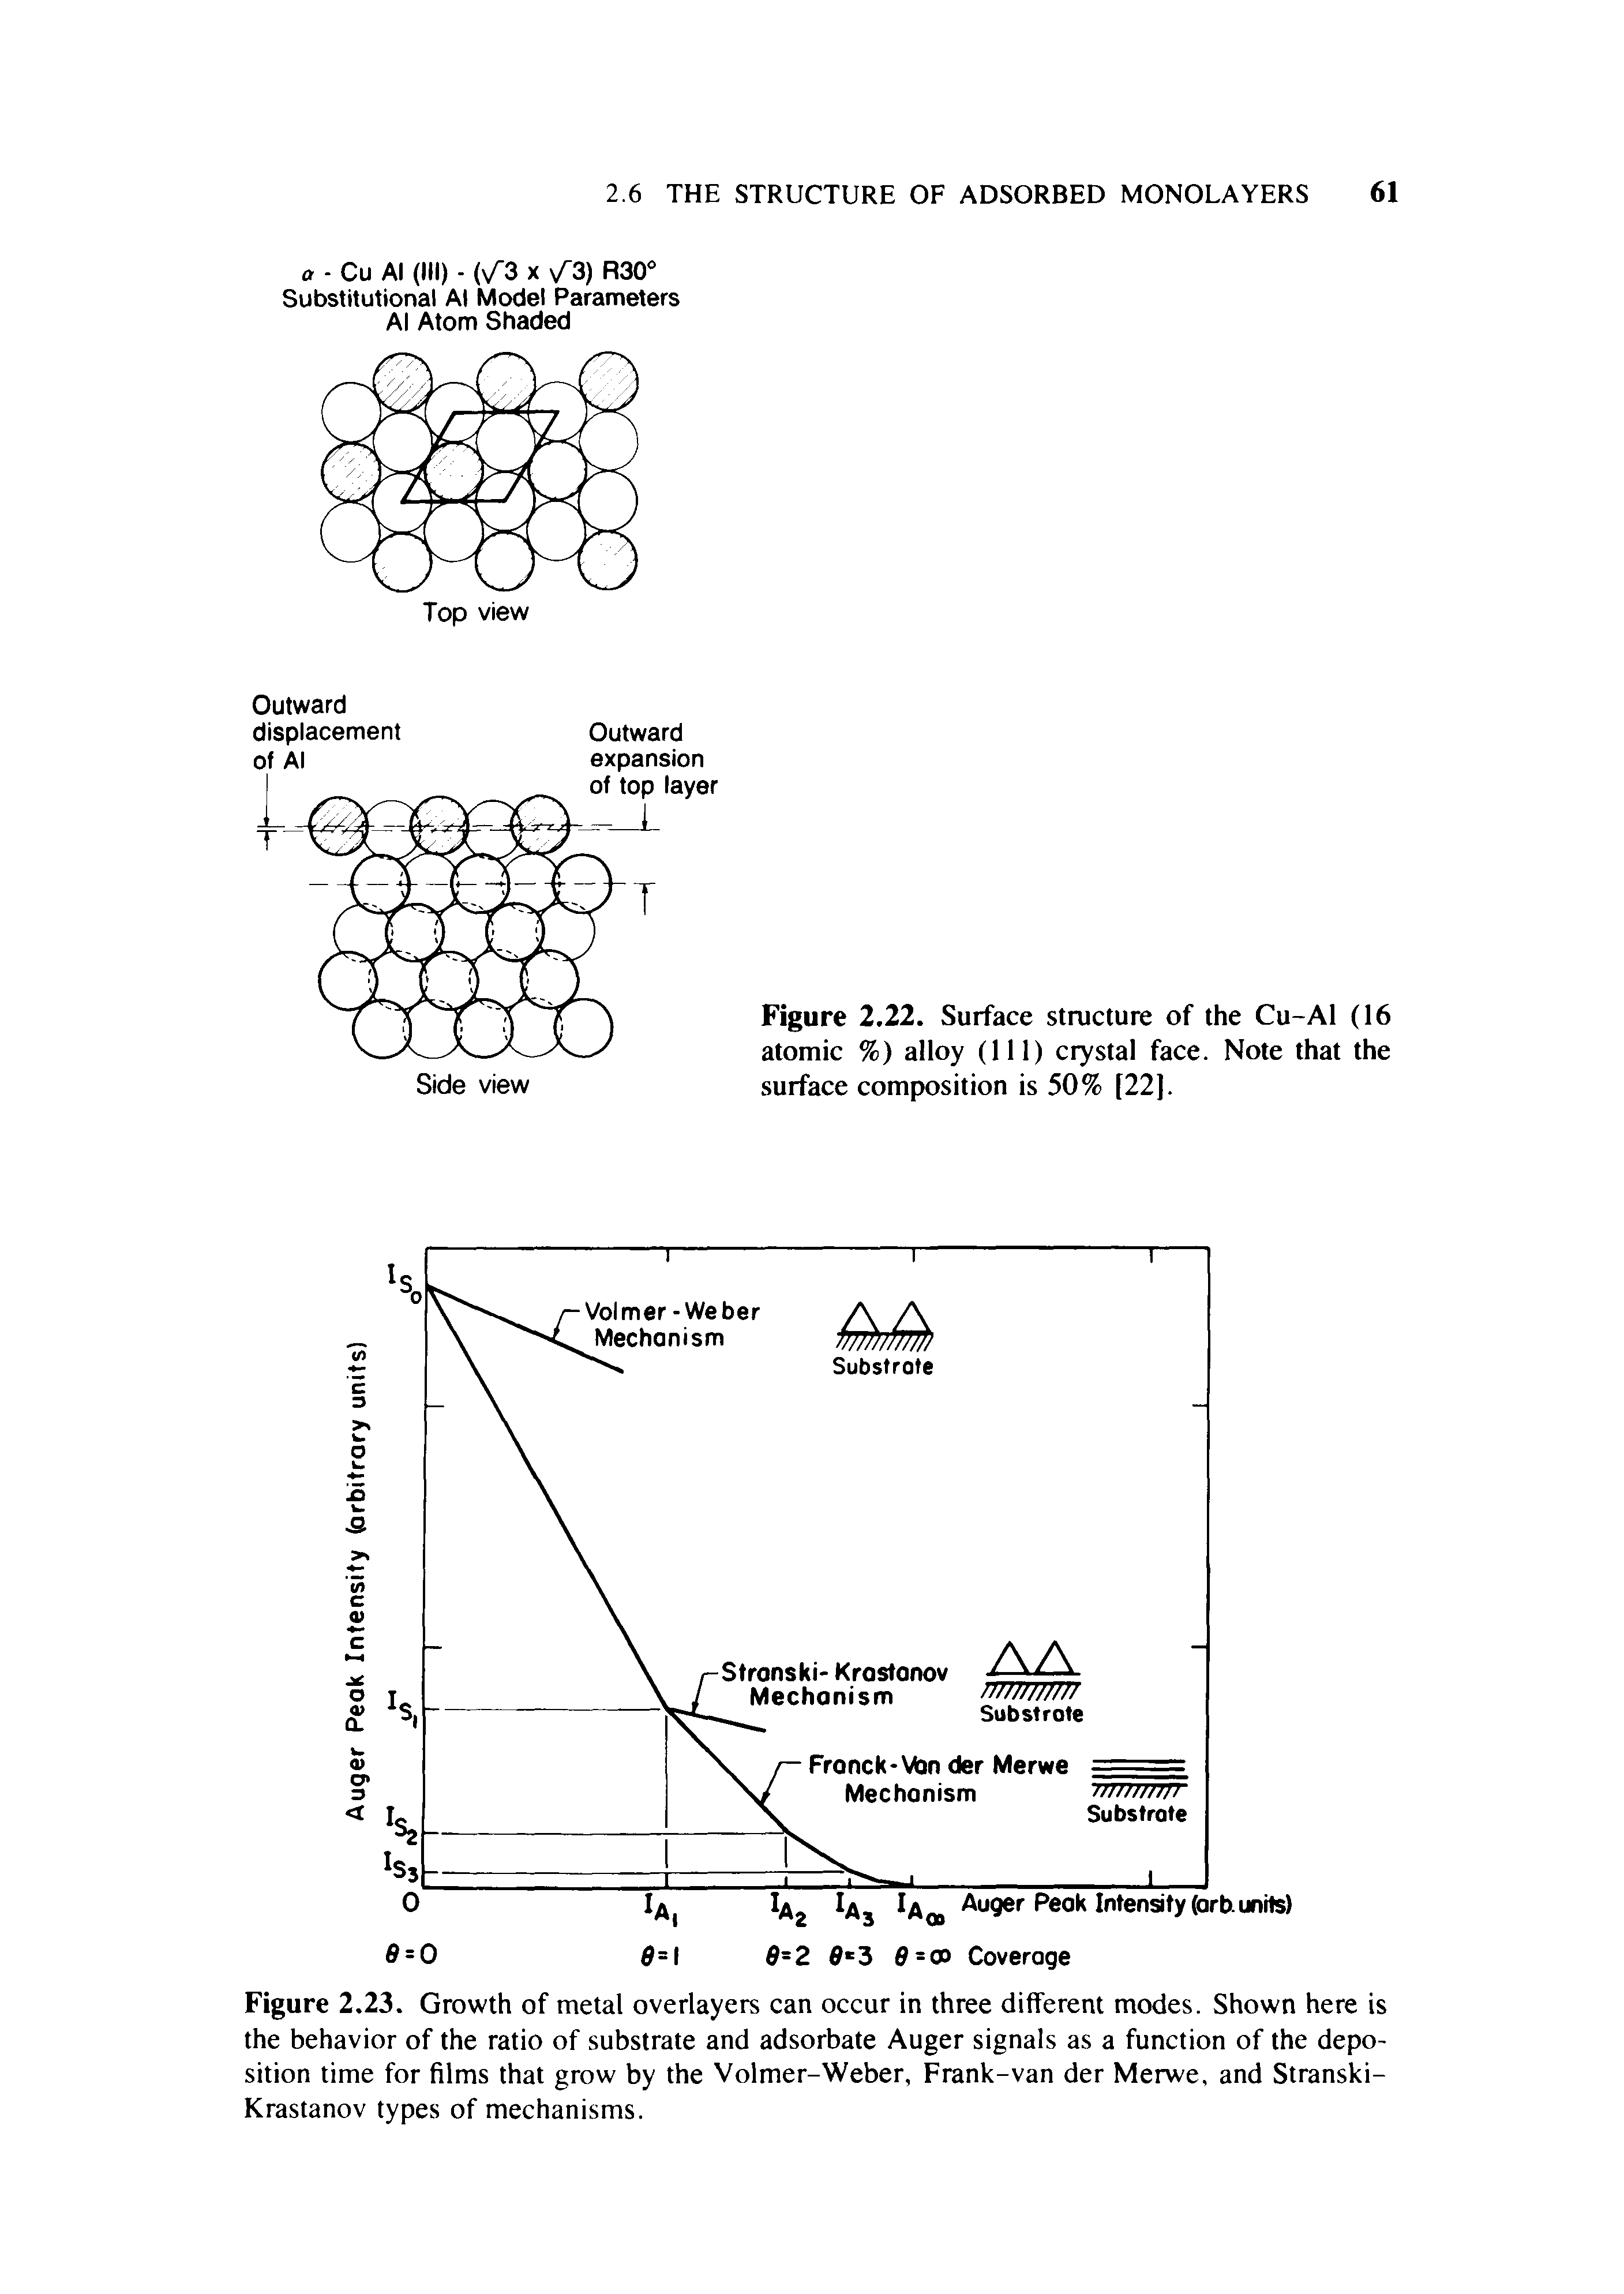 Figure 2.23. Growth of metal overlayers can occur in three different modes. Shown here is the behavior of the ratio of substrate and adsorbate Auger signals as a function of the deposition time for films that grow by the Volmer-Weber, Frank-van der Merwe, and Stranski-Krastanov types of mechanisms.